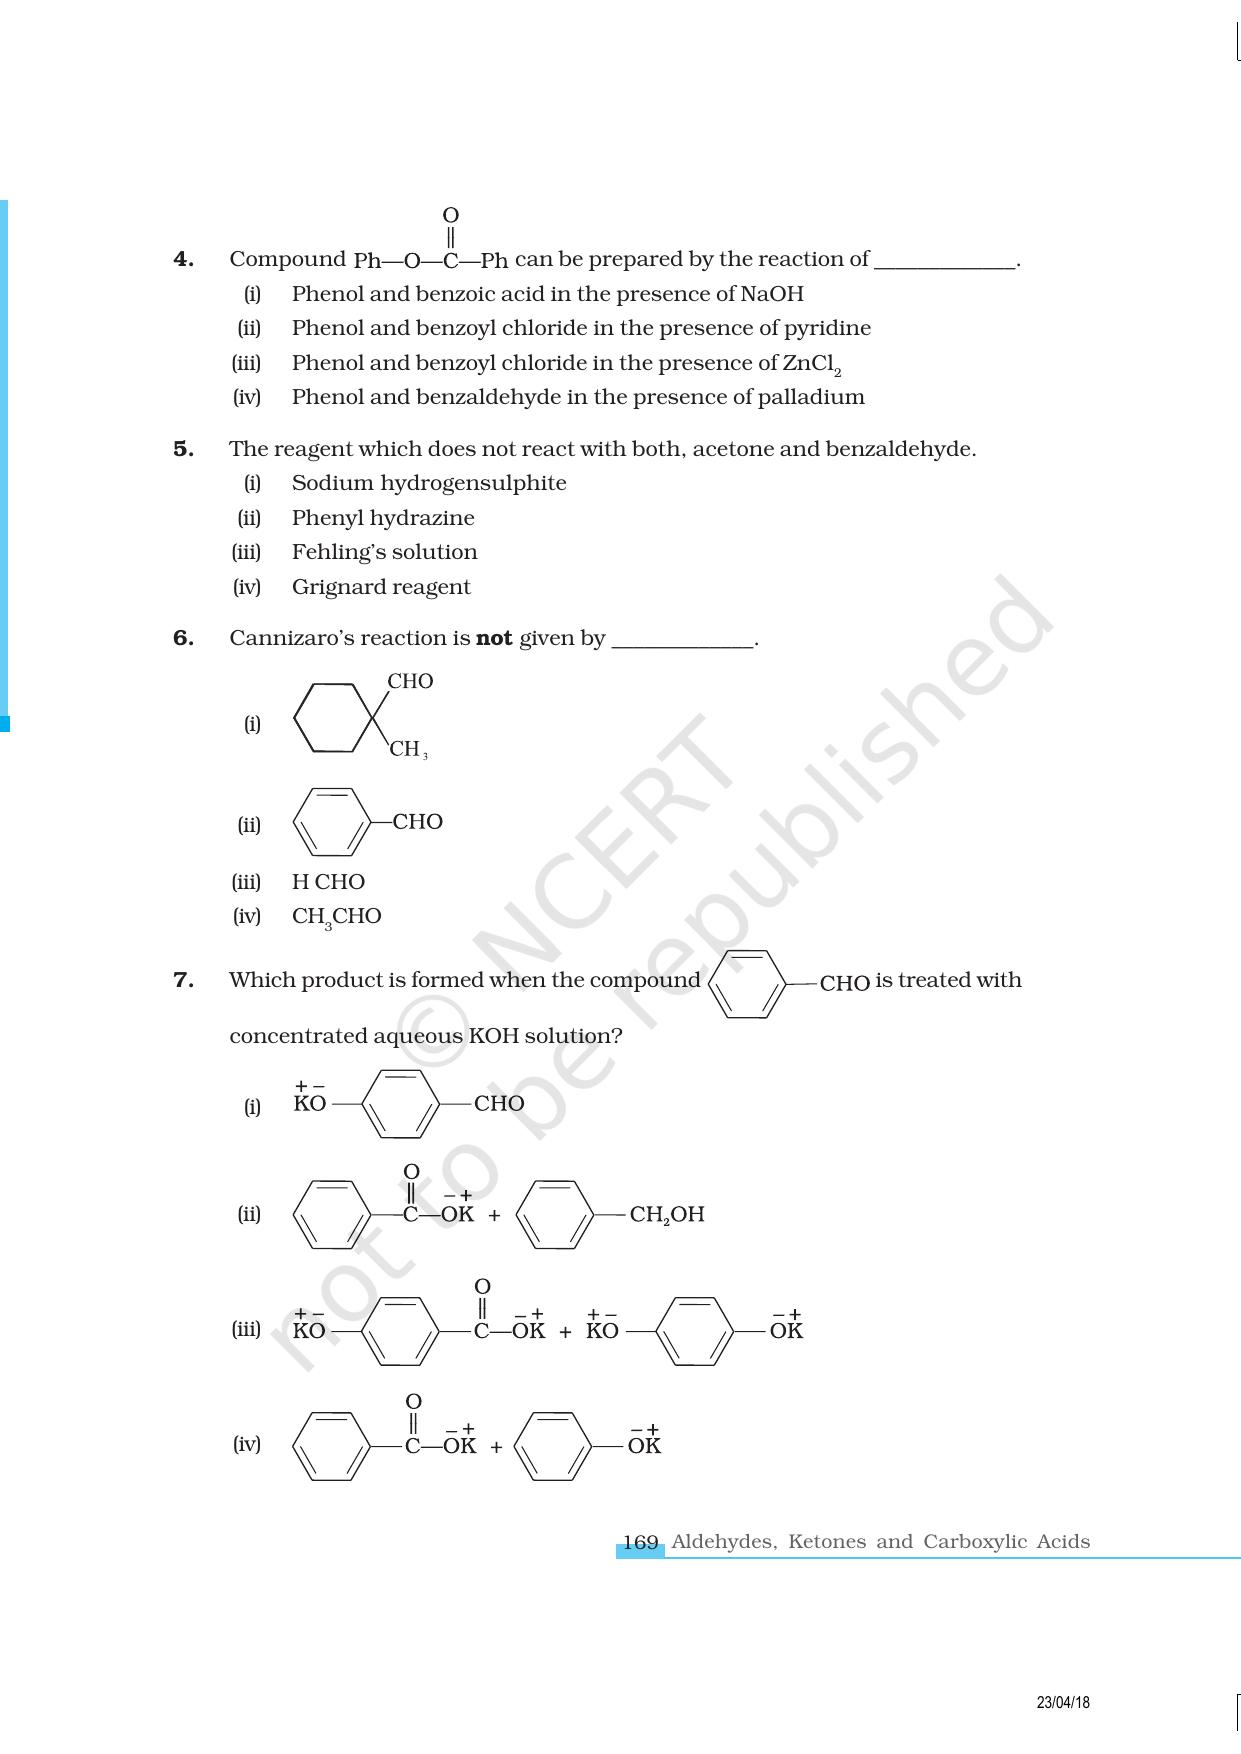 NCERT Exemplar Book for Class 12 Chemistry: Chapter 12 Aldehydes, Ketones and Carboxylic Acids - Page 2